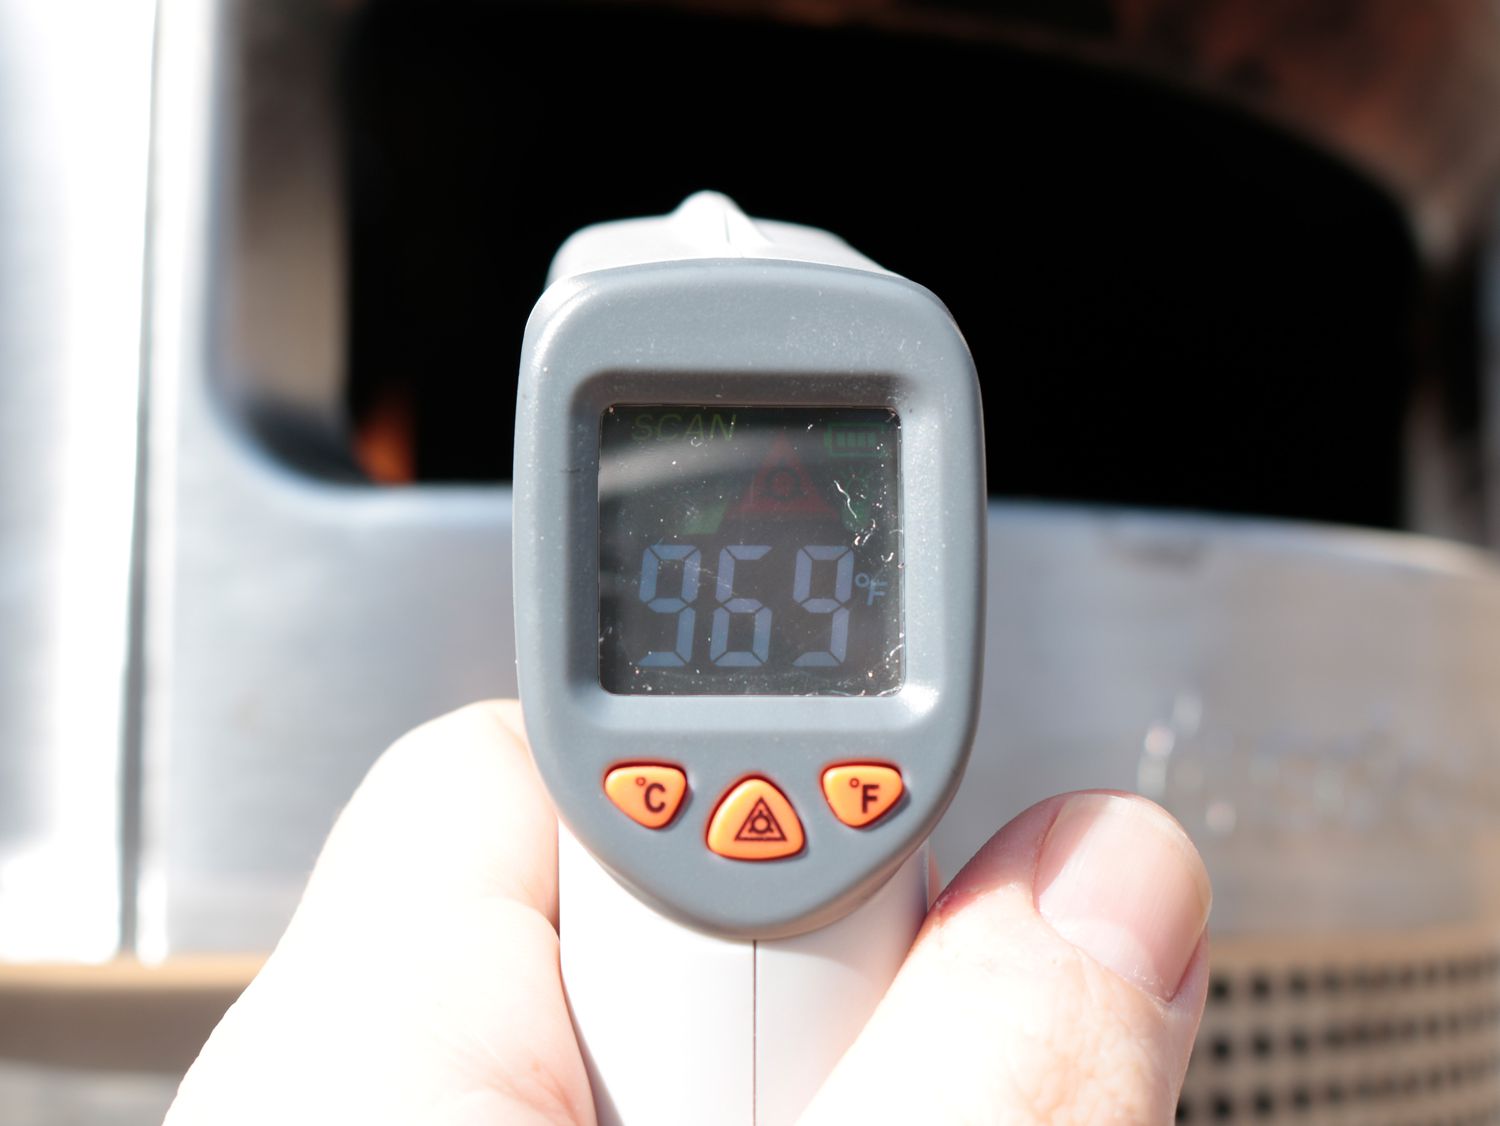 an infrared thermometer reads 969ÂºF